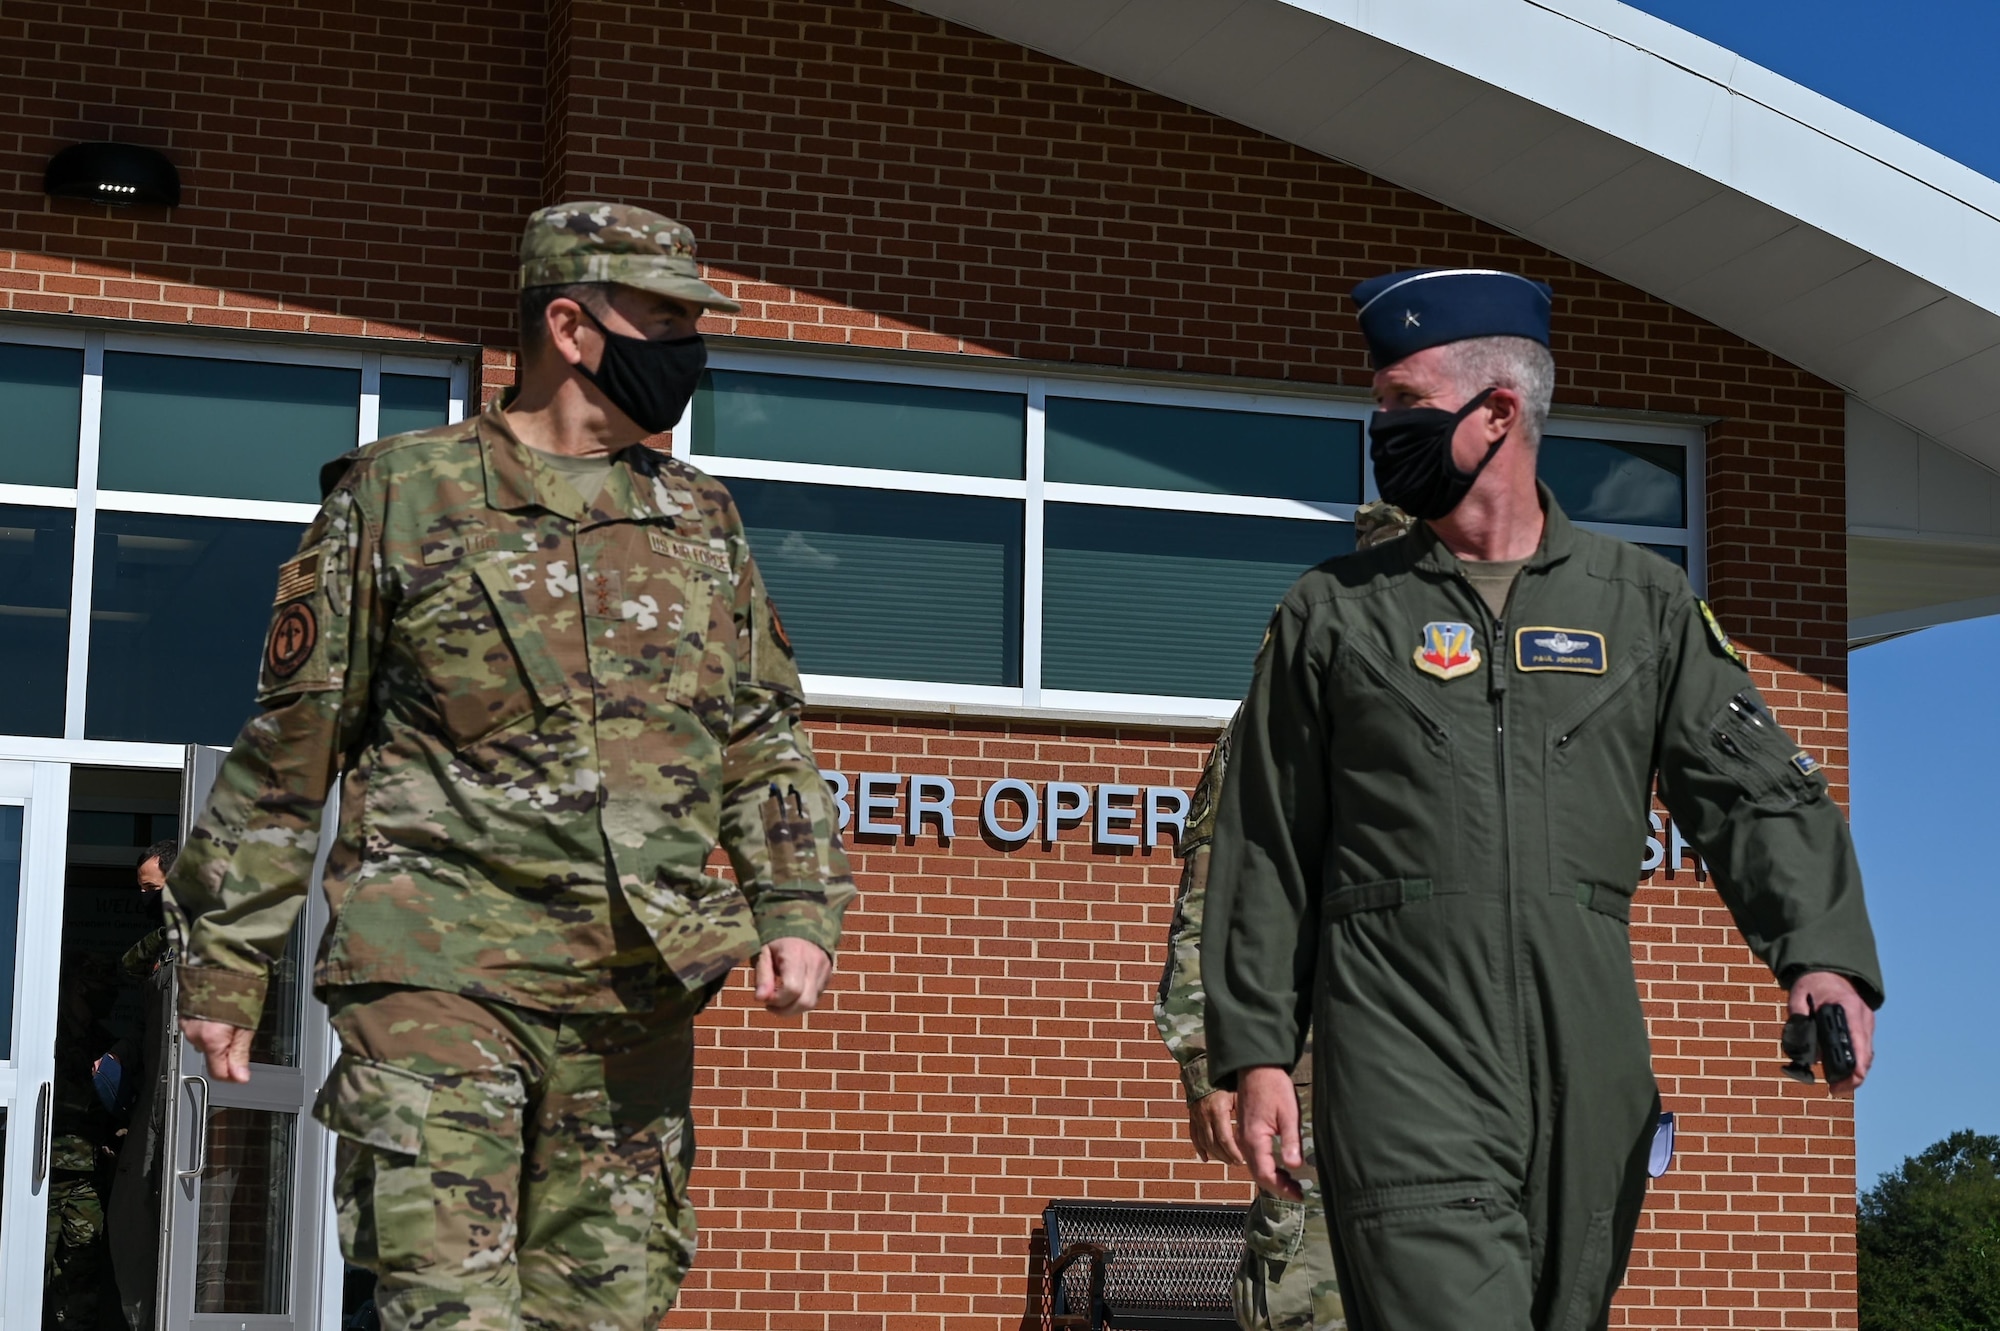 U.S. Air Force Lt. Gen. Michael A. Loh, the 13th director of the Air National Guard, walks alongside U.S. Air Force Brig. Gen. Paul Johnson, commander of the 175th Wing, Oct. 3, 2020, at Warfield Air National Guard Base, Middle River, Md. Loh and Johnson just visited the newly built Cyber Operations and Intelligence Surveillance and Reconnaissance building following a cyber mission brief.  (U.S. Air National Guard photo by Senior Airman Sarah M. McClanahan)